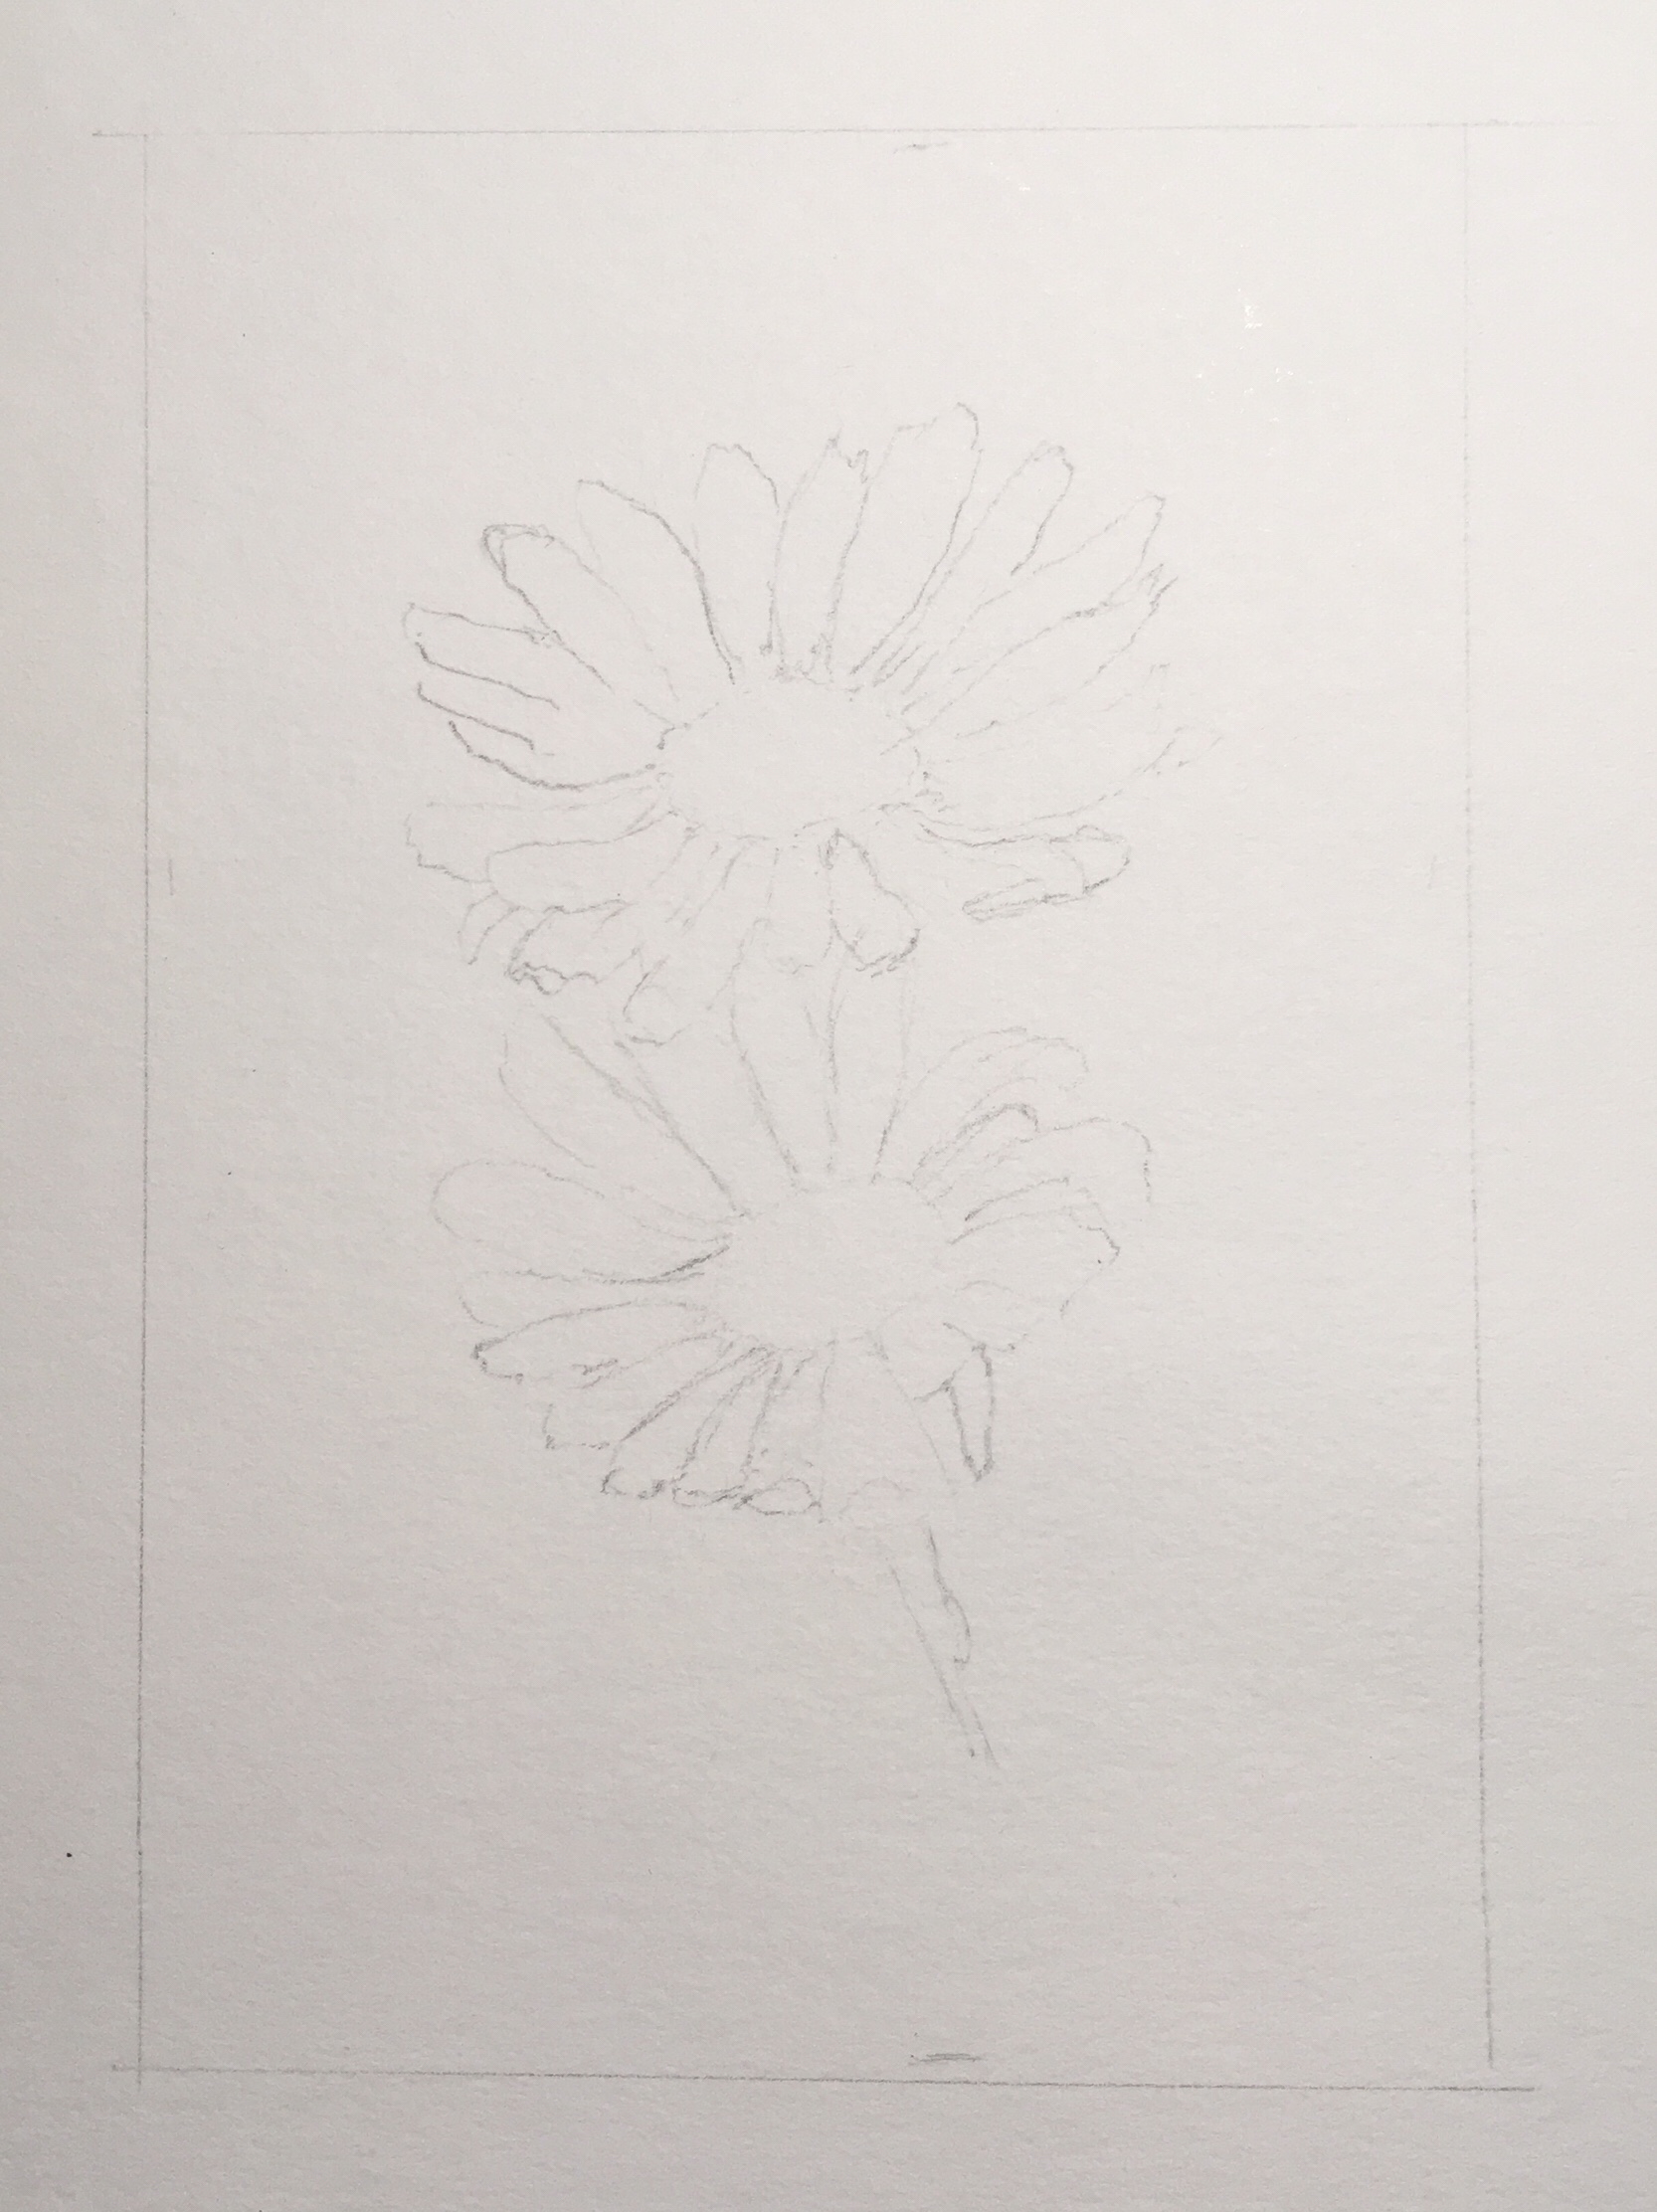 Rough pencil sketch to mark where the daisies are.